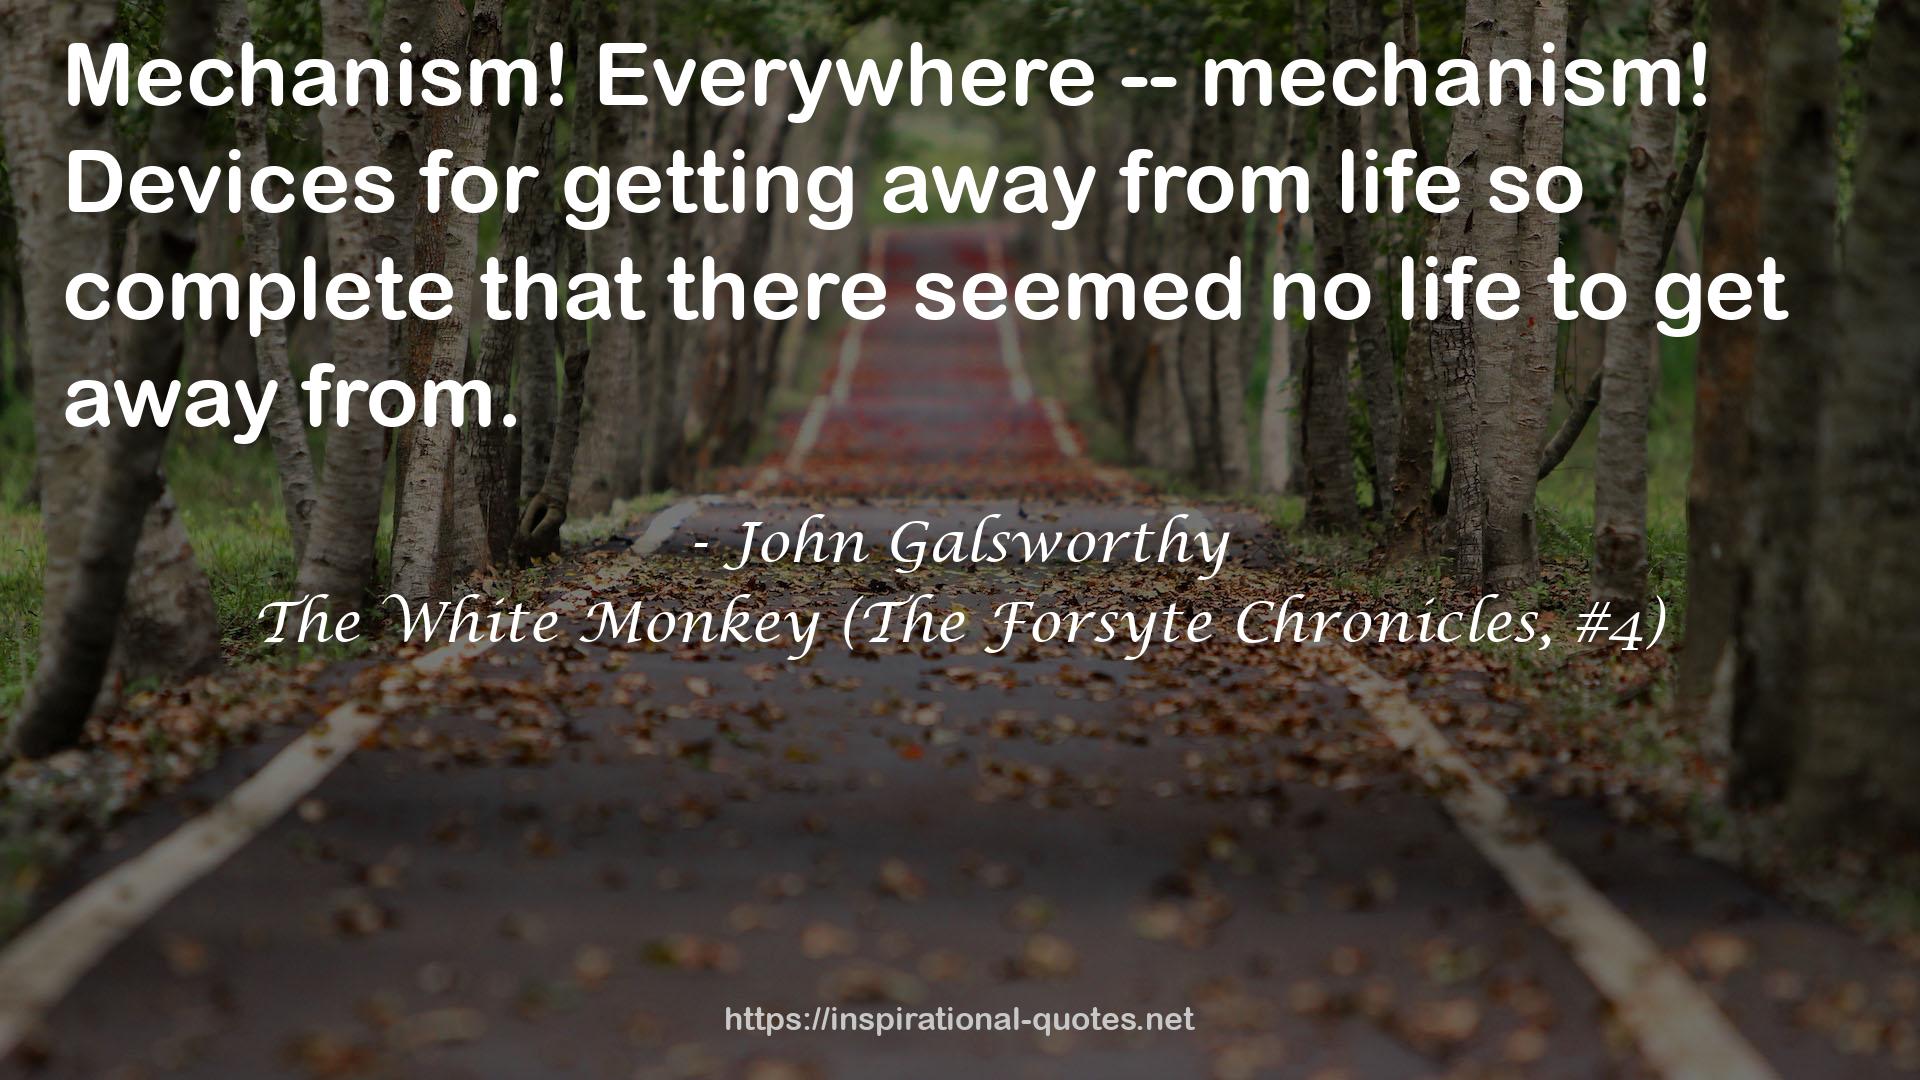 The White Monkey (The Forsyte Chronicles, #4) QUOTES